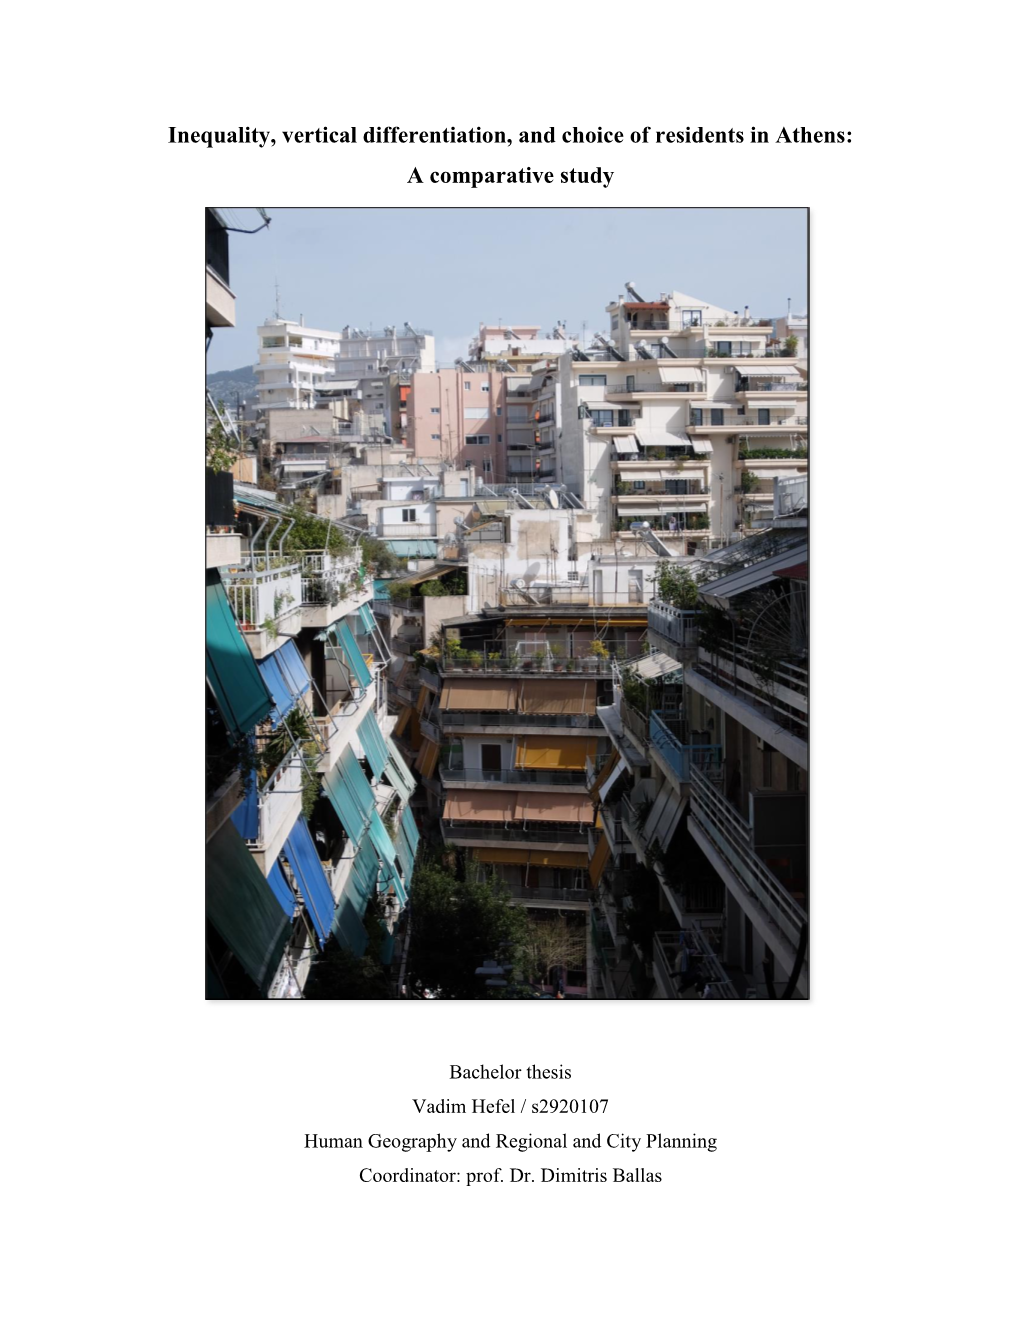 Inequality, Vertical Differentiation, and Choice of Residents in Athens: a Comparative Study